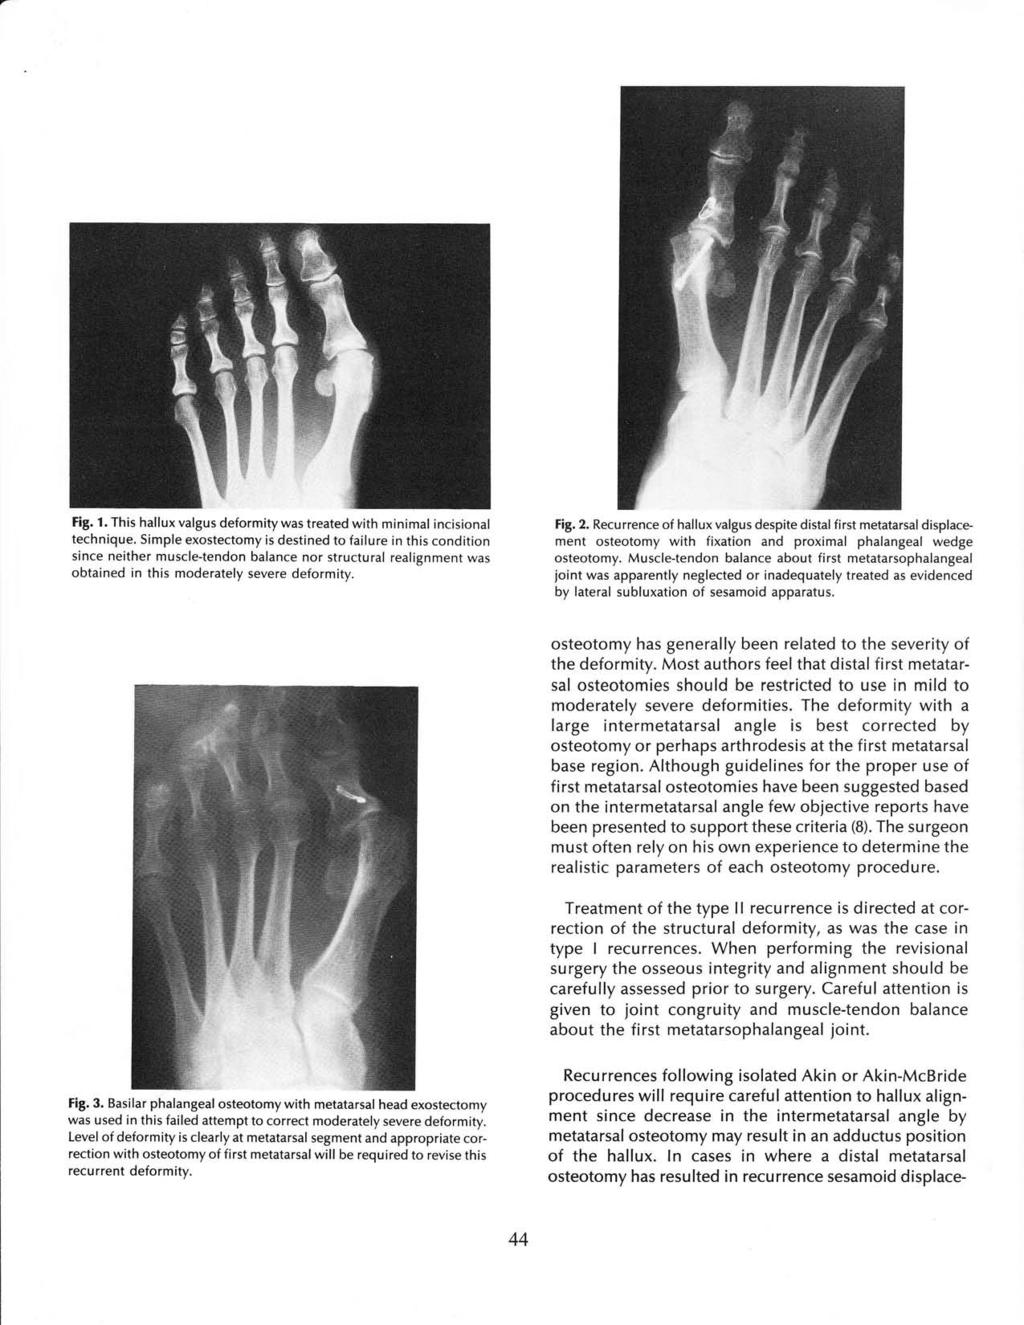 Fig. 1. This hallux valgus deformity was treated with minimal incisional technique.